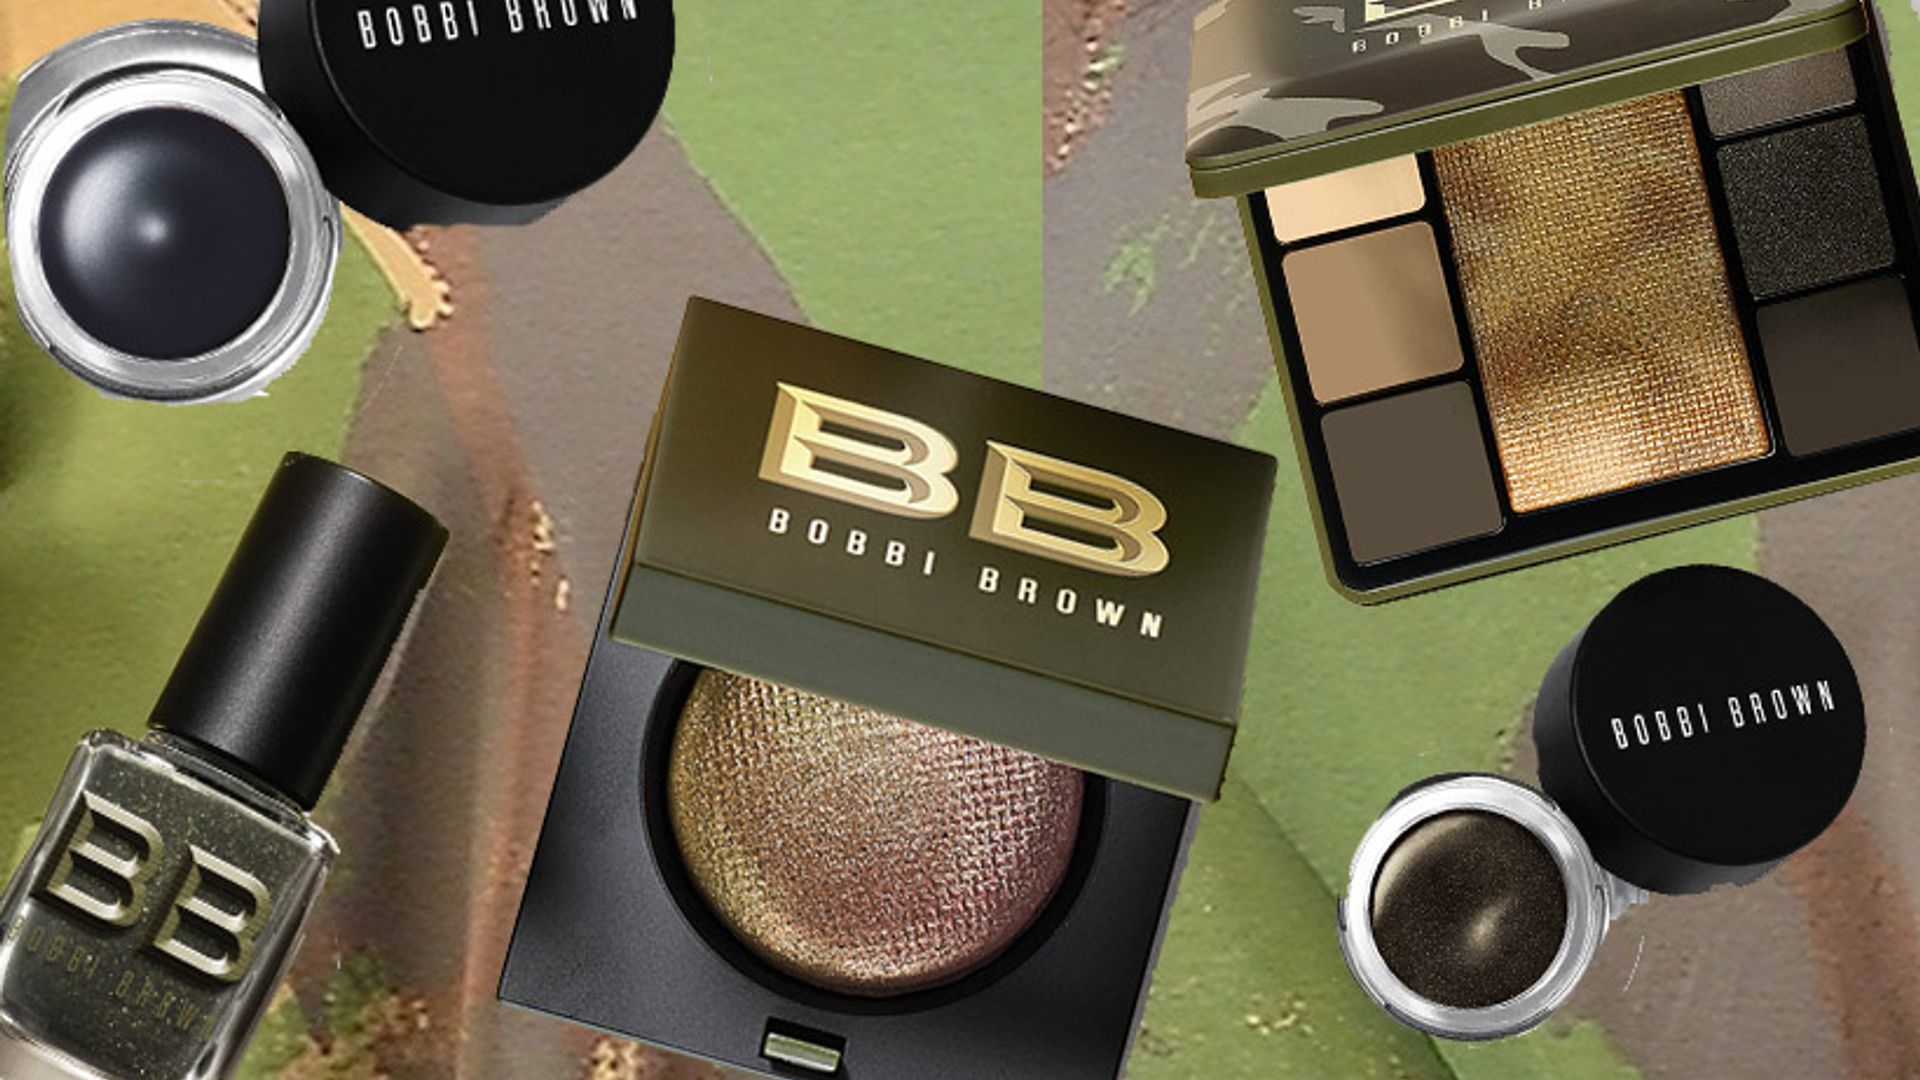 Bobbi Brown is bringing out a very cool camo-inspired beauty range  